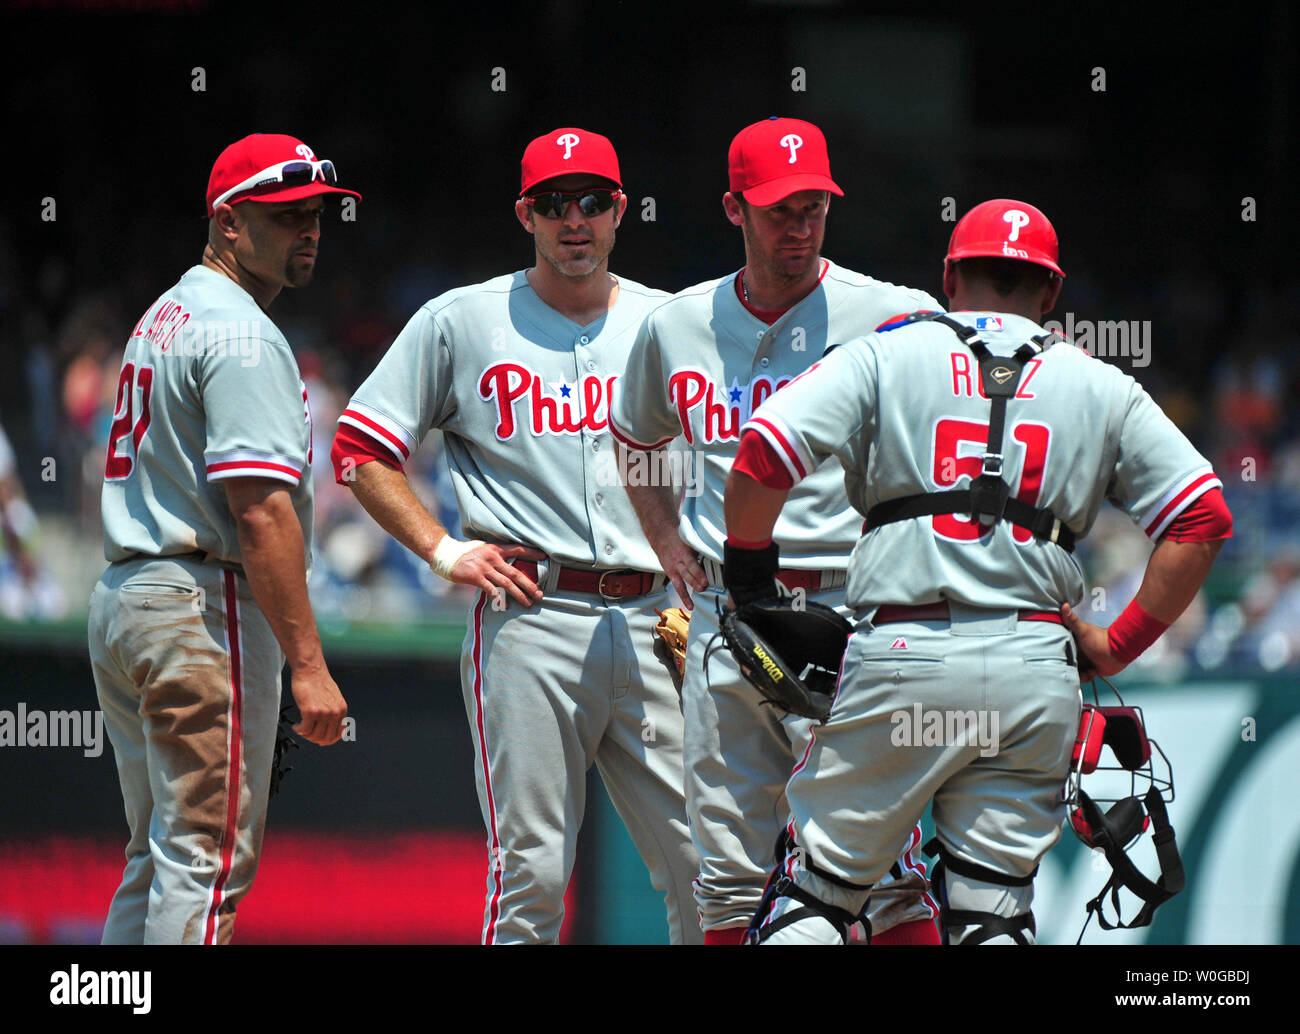 Philadelphia Phillies pitcher Roy Oswalt meets on the mound with